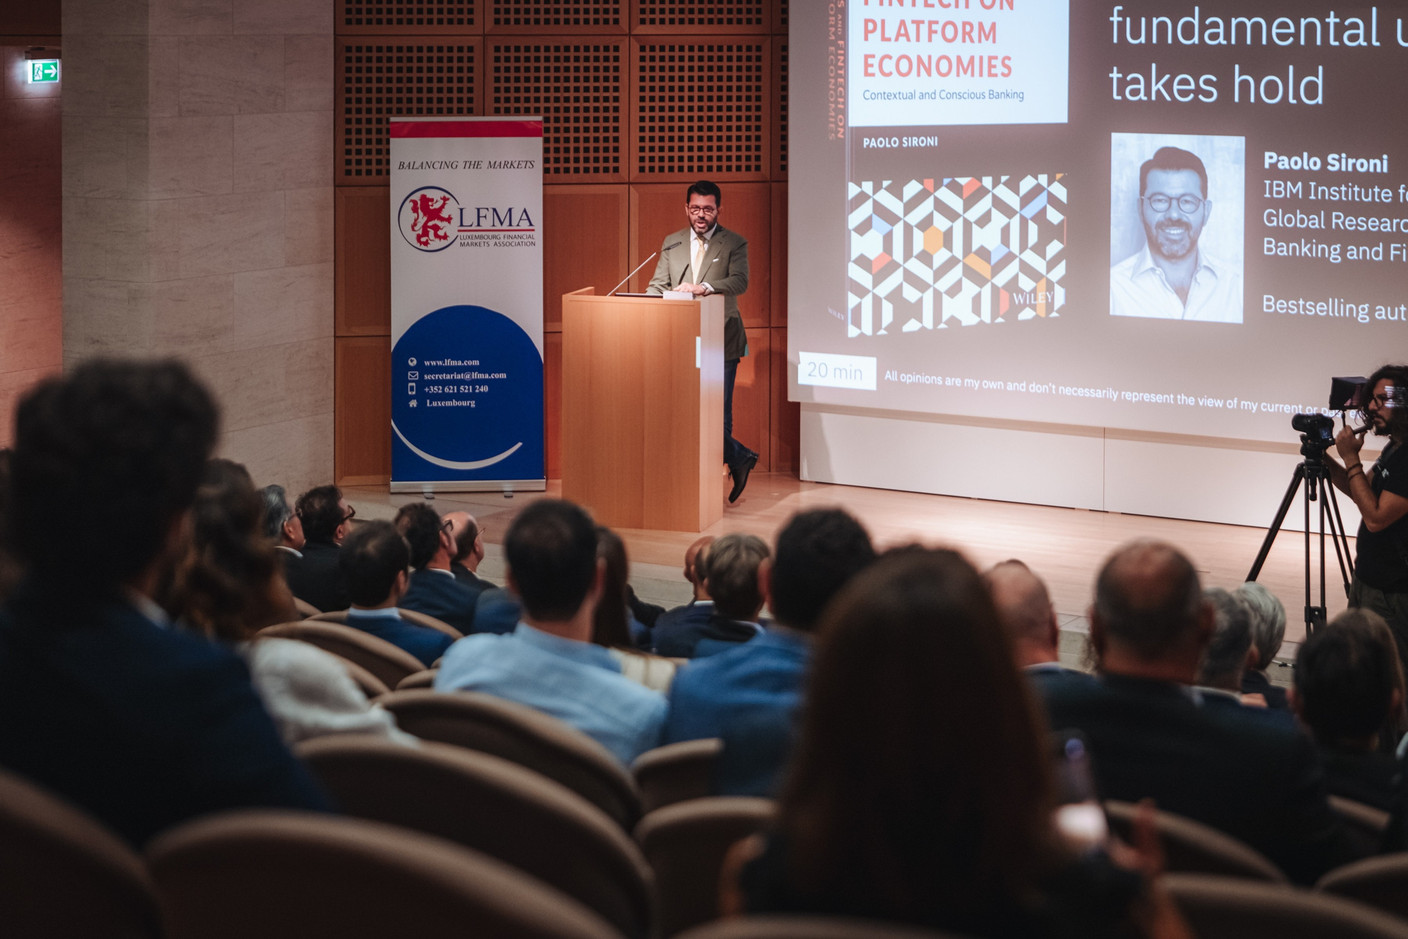 Paolo Sironi, global research leader in banking and financial markets at IBM, Institute for Business Value, talked about reinventing financial services on platform economies at the LFMA’s Forward Financial Thinking Forum, held on 12 September 2023 at the Mudam. Photo: Sabino Parente